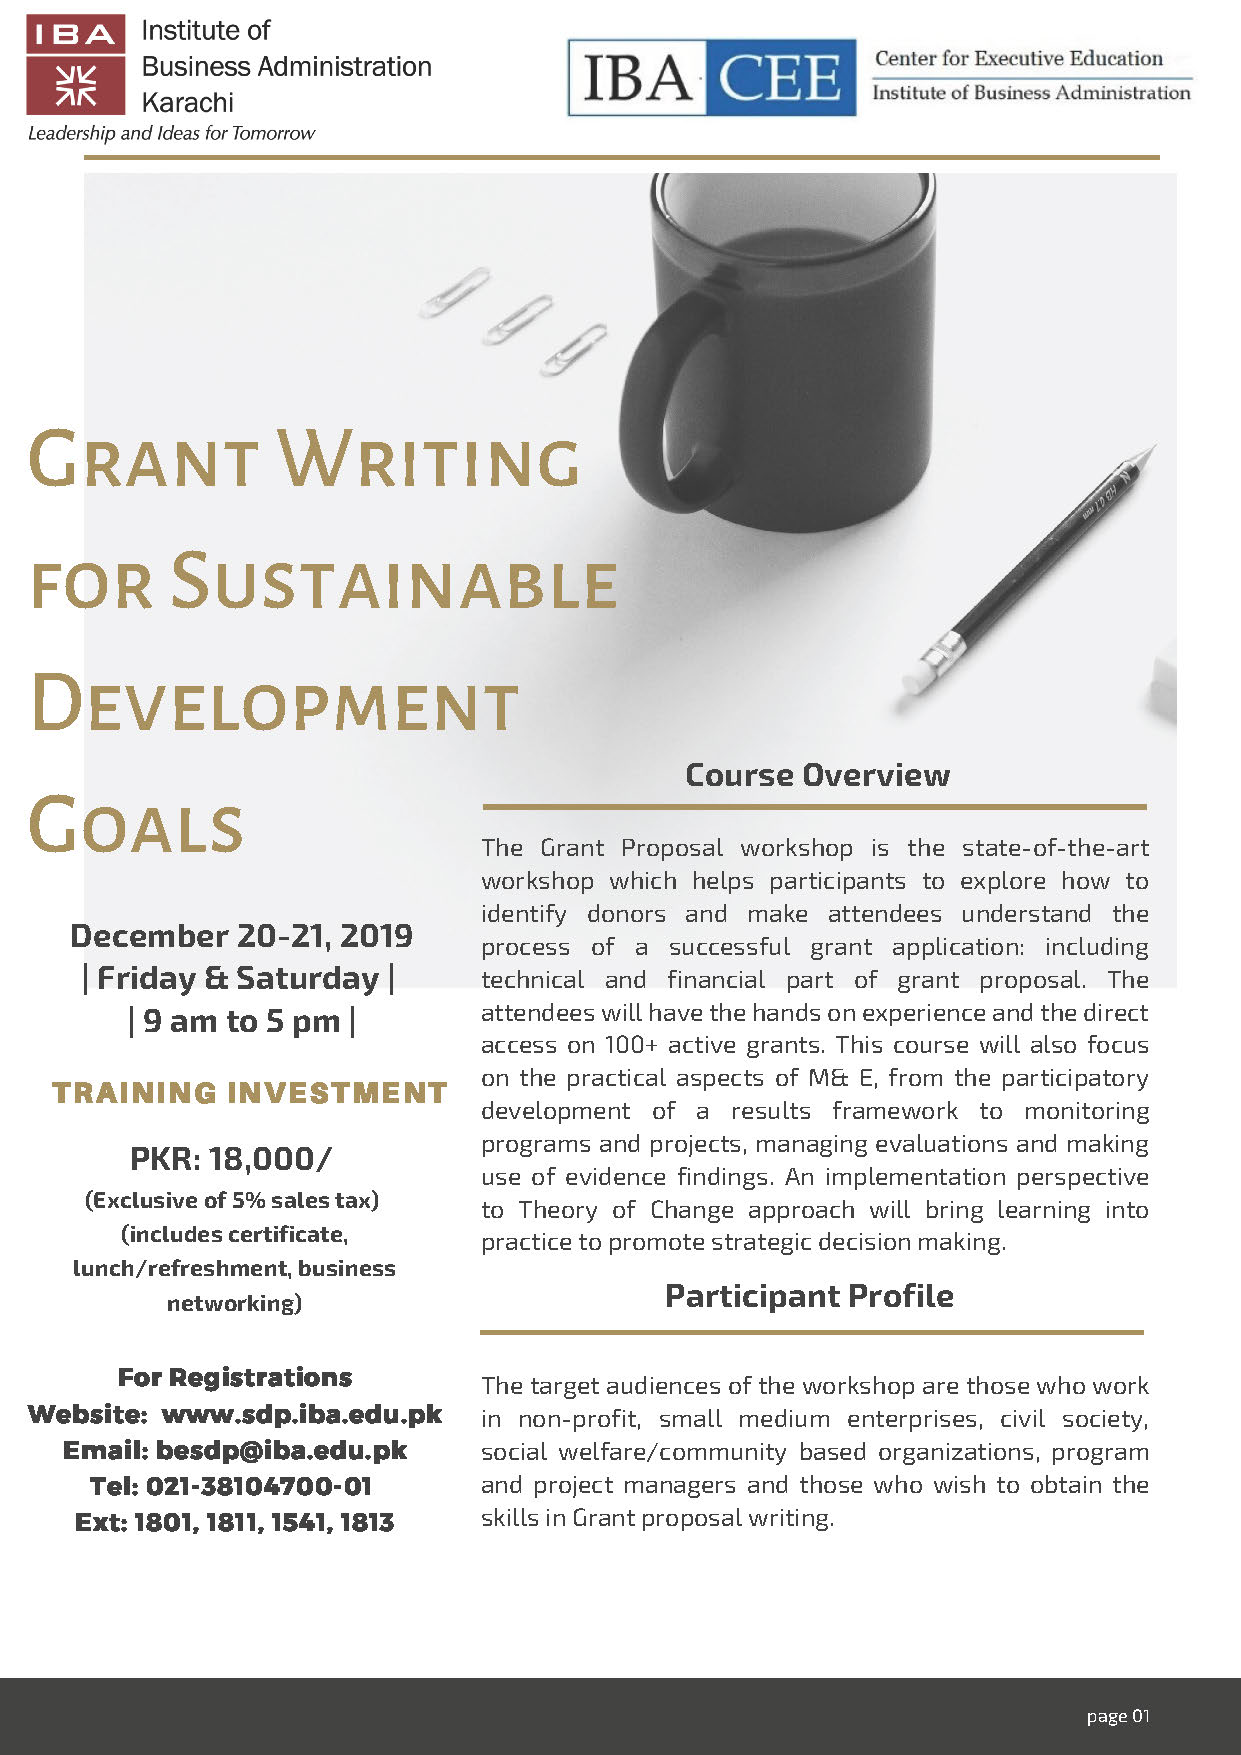 Grant Writing for Sustainable Development Goals